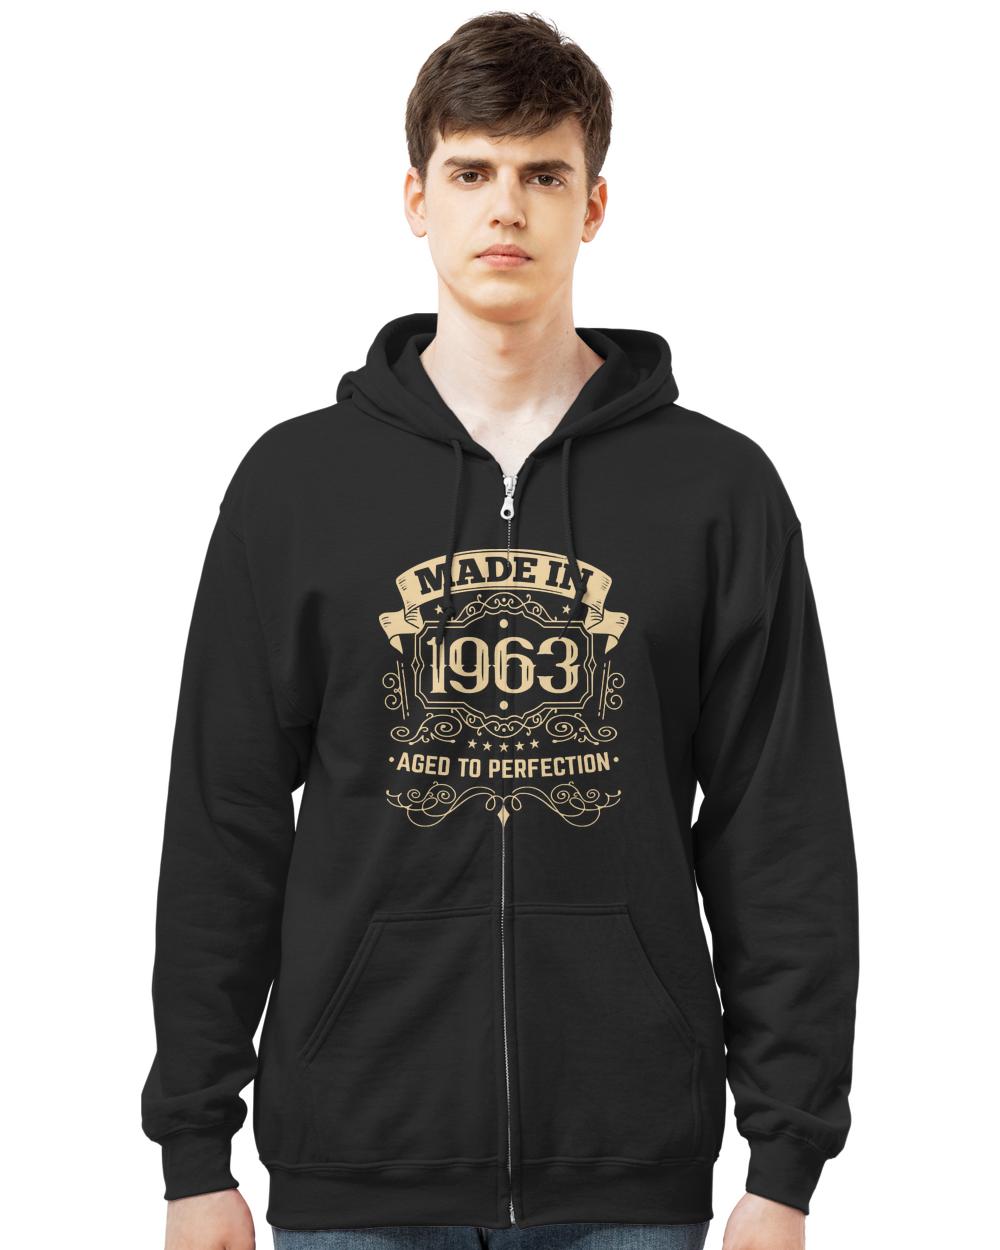 Gift Idea T-Shirt60th birthday born in 1963 - Made in 1963 T-Shirt (2)